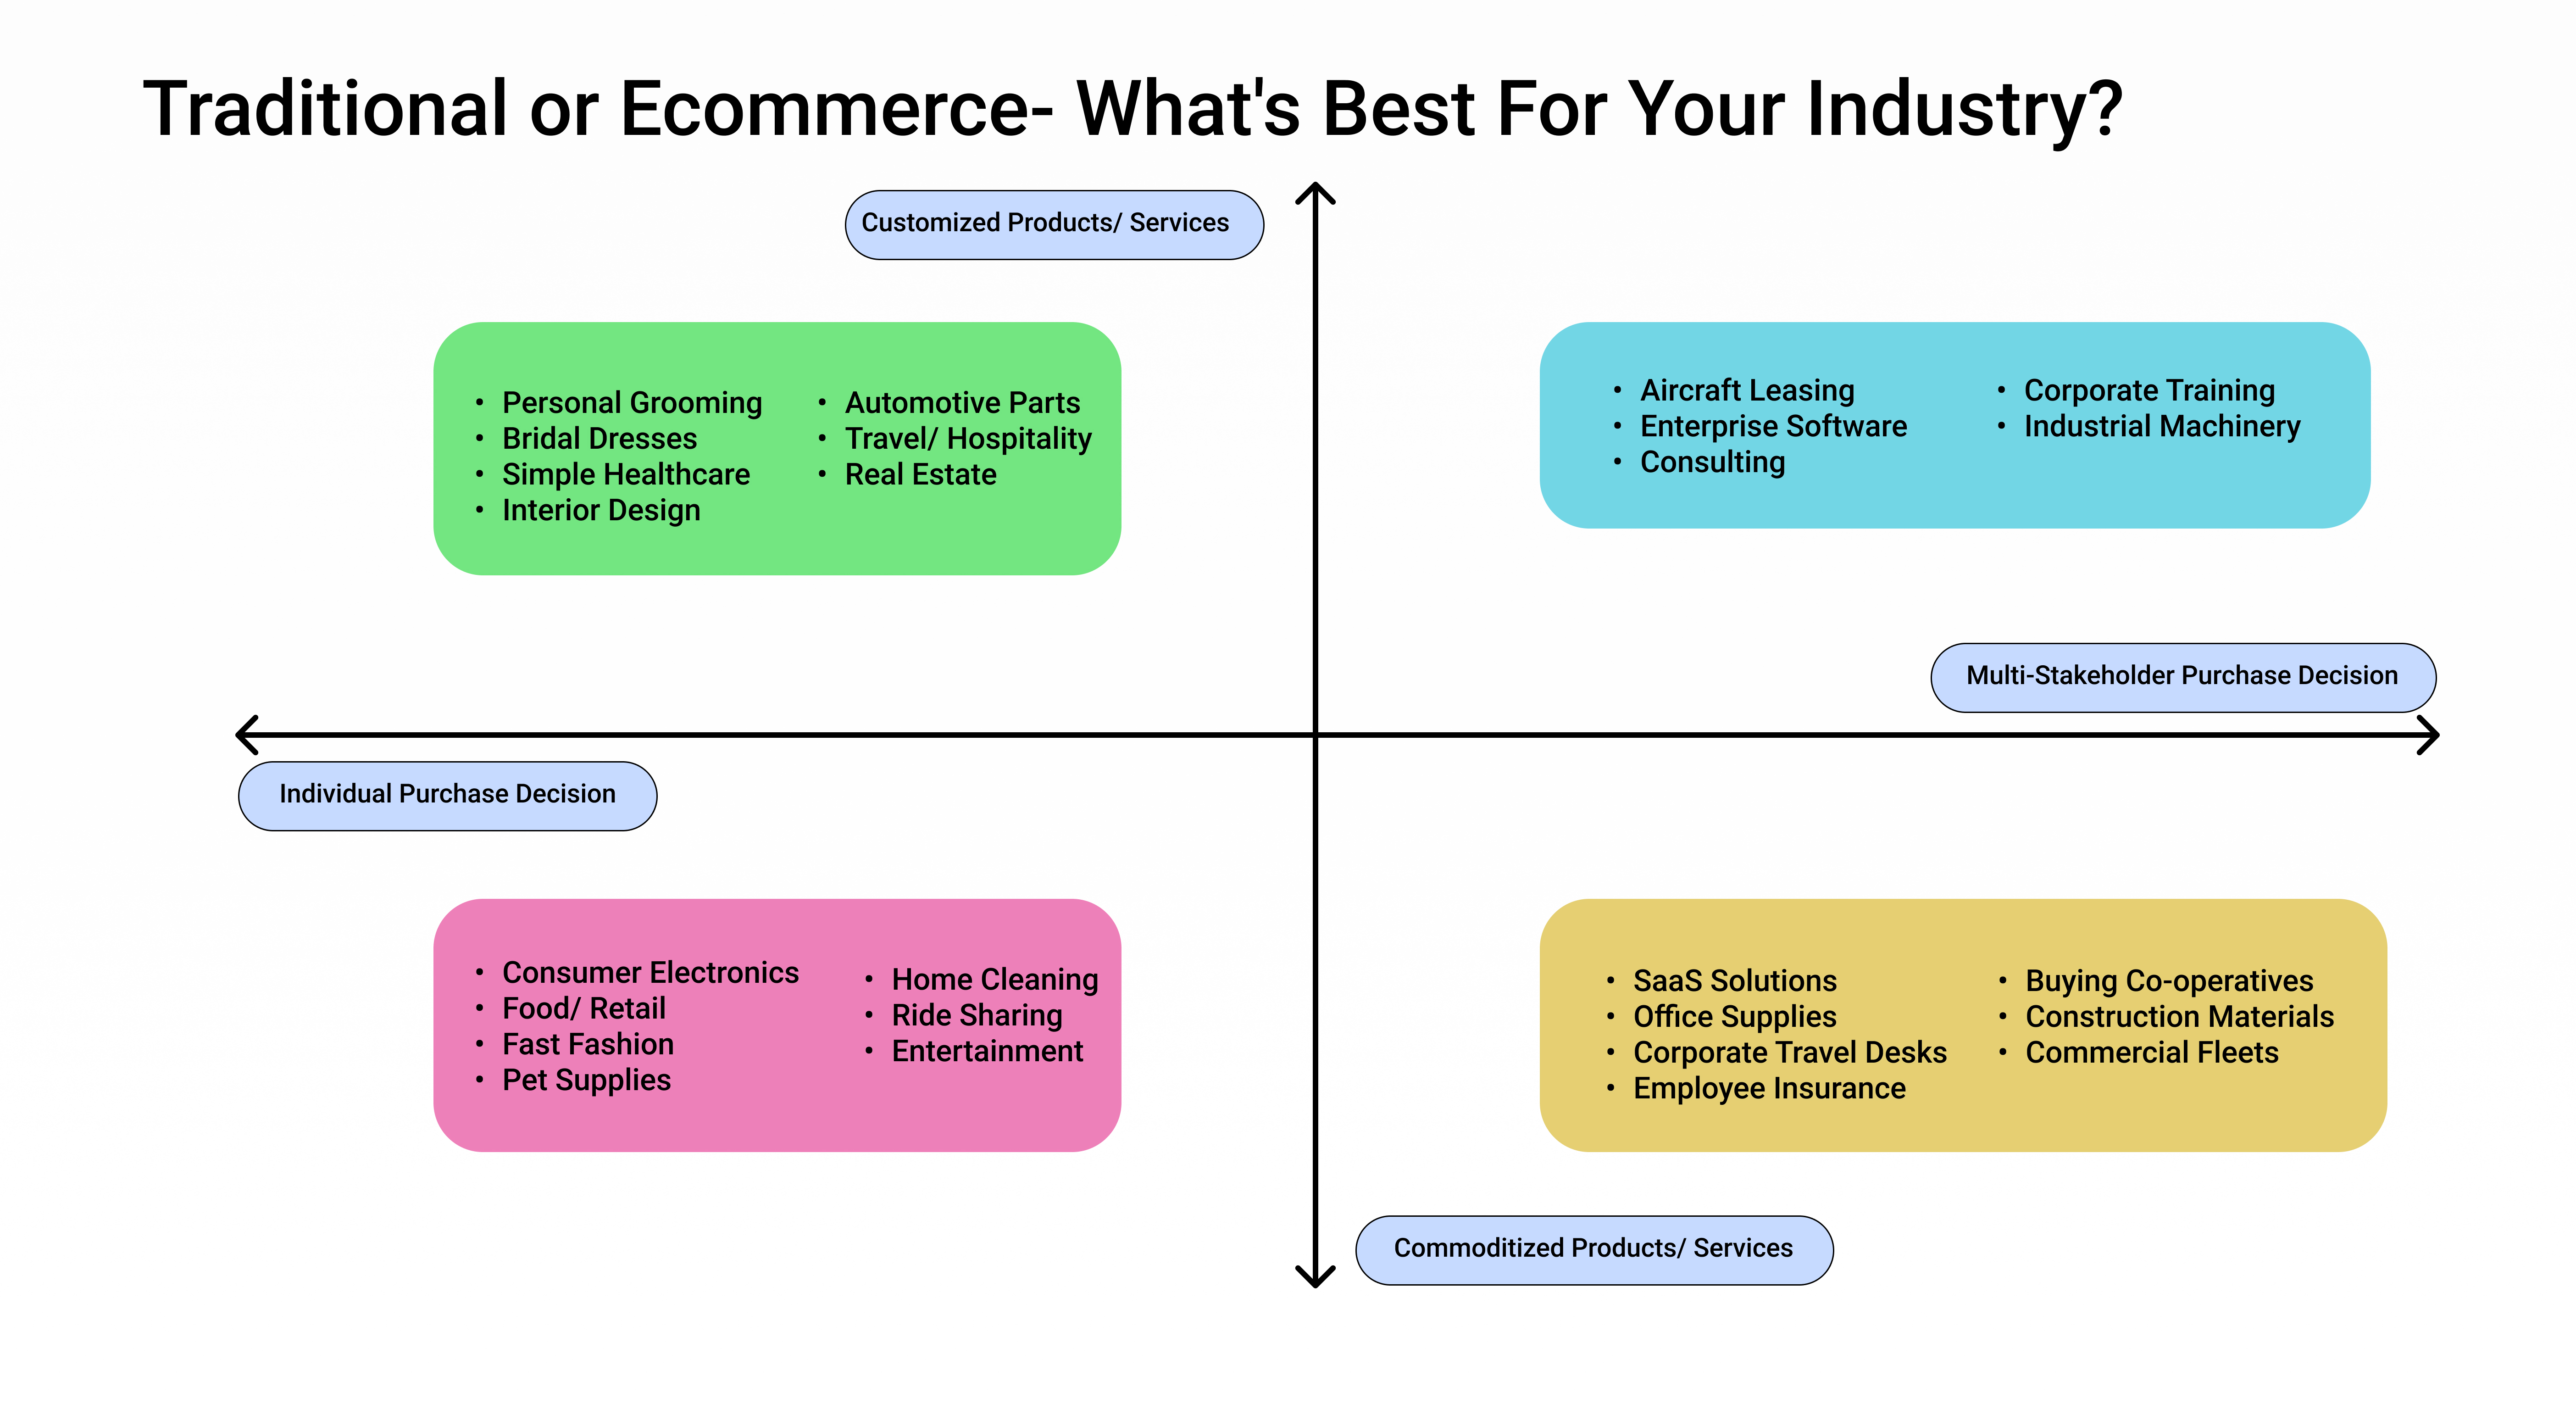 How to decide if your business is suited for ecommerce or not. Number of stakeholders, Customization. Aircraft Leasing, Enterprise Software, Management Consulting, Corporate Training, Personal Grooming, Bridal Dresses, Healthcare, Automotive Parts, Real Estate, Travel, Hospitality, Consumer Electronics, Retail, Food, Fast Fashion, Pet Services, Home Cleaning, Ride Sharing, Uber, Entertainment, SaaS Solutions, Office Supplies, Corporate Travel Desk, Health Insurance, Construction Materials, Commercial Vehicle Fleets